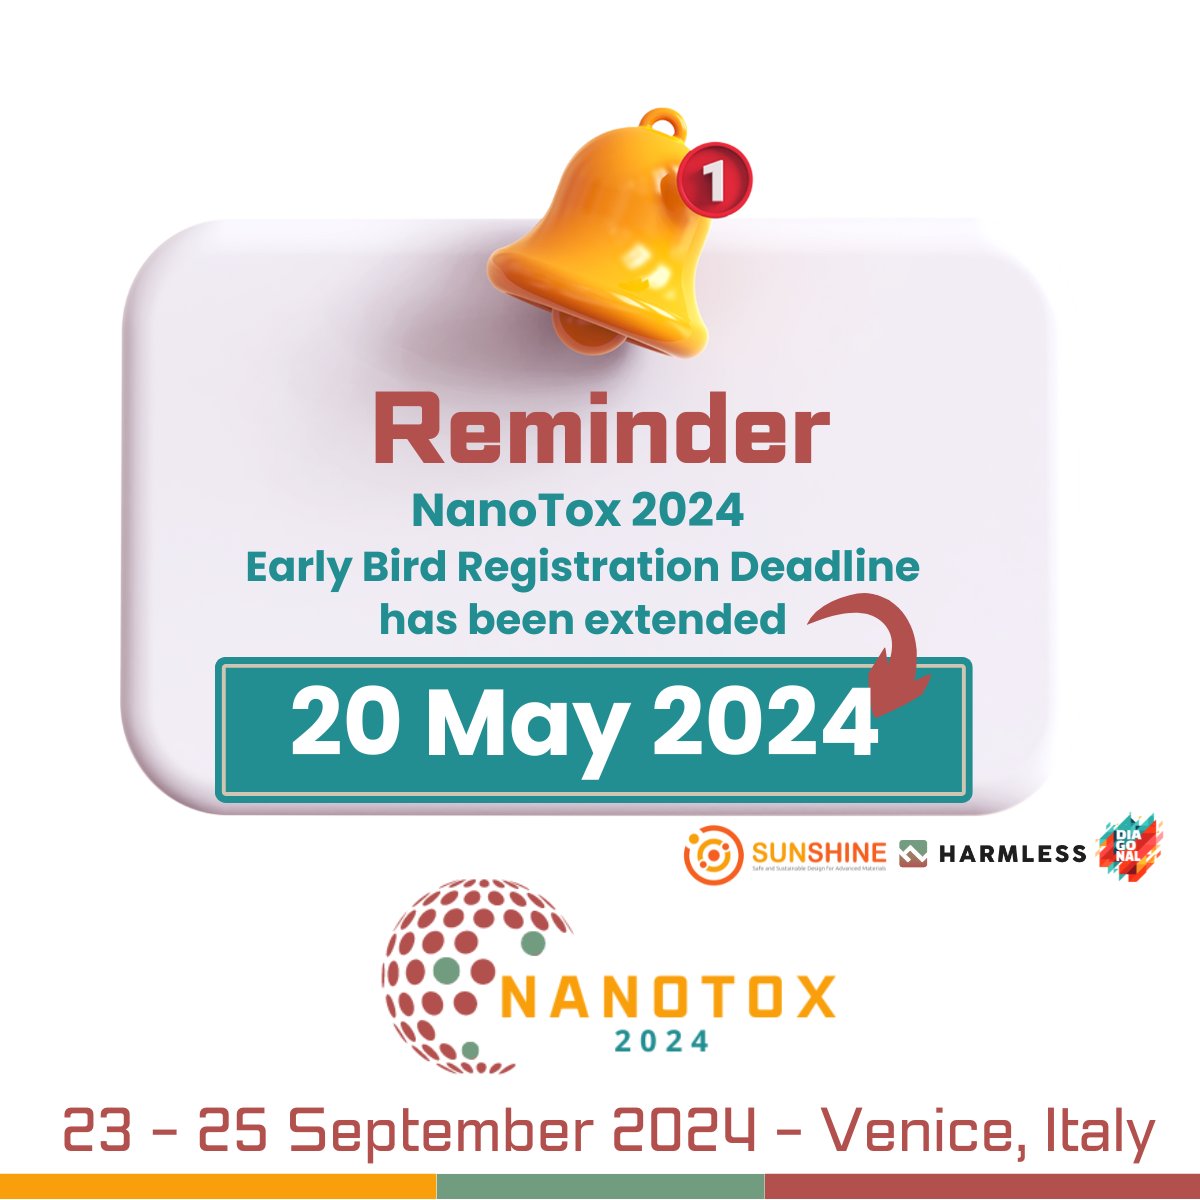 📢Attention! We're pleased to announce that the deadline for #NanoTox2024 early bird registration has been extended! ⏰ New Early Bird Registration Deadline: 20 May 2024 👉More details about the reservation: nanotox2024.eu/register 📍We hope you can join us in #Venice!